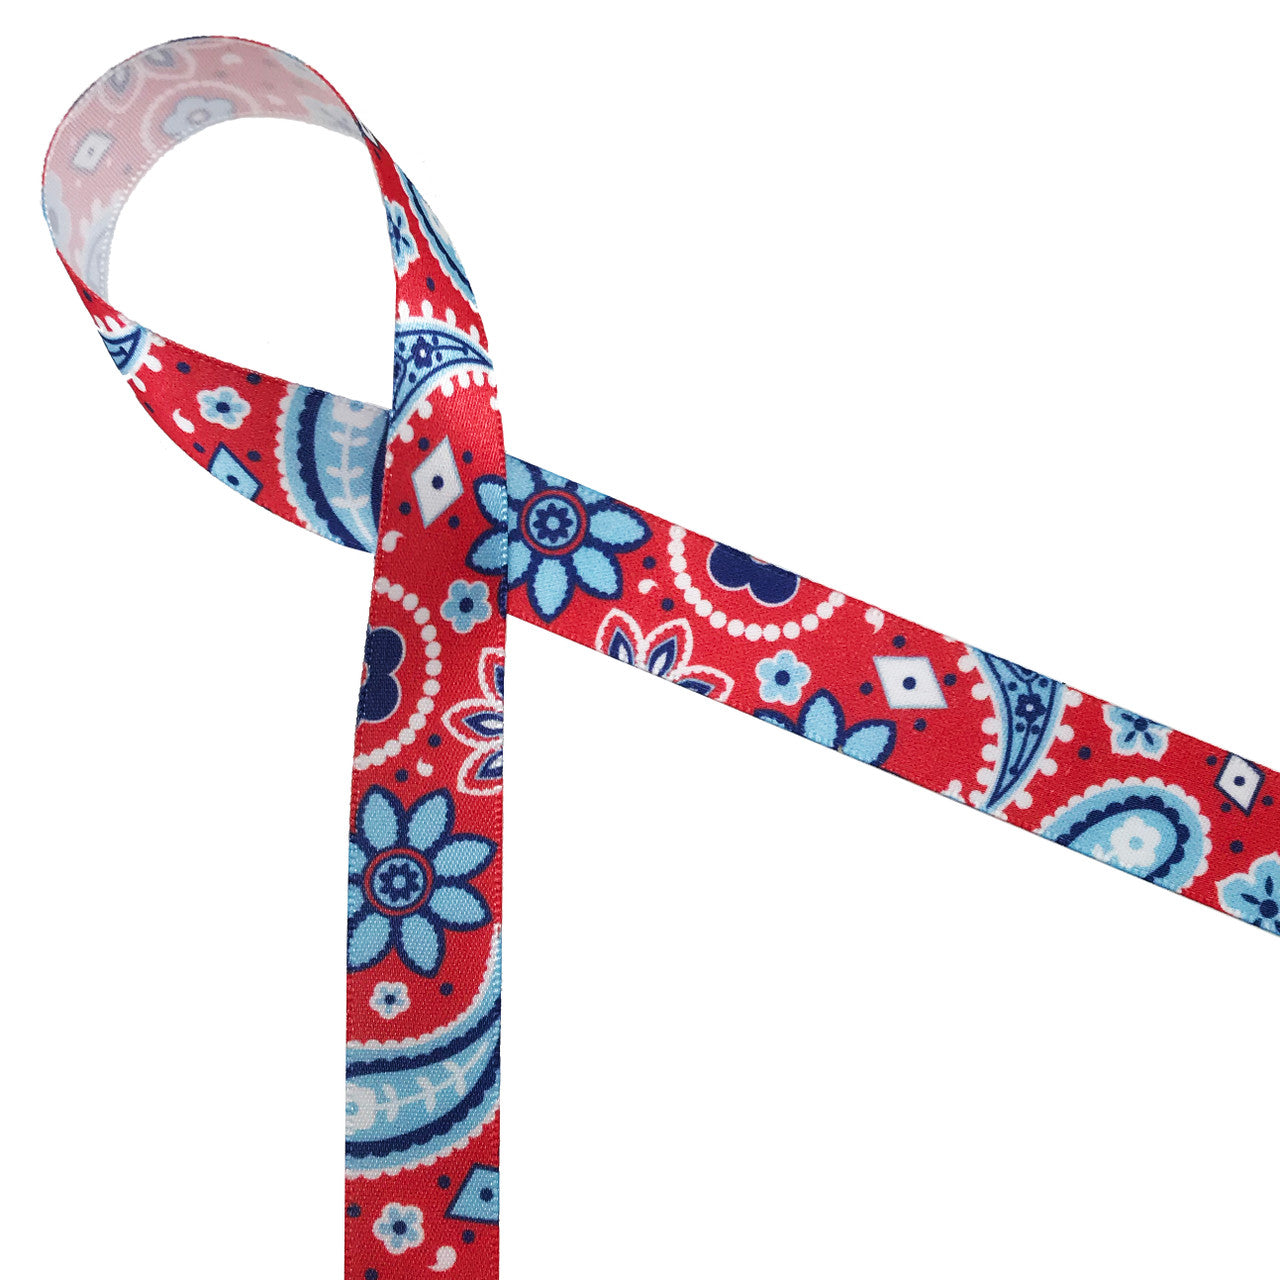 Patriotic paw print ribbon in red white and blue printed on 7/8 white  satin, 10 Yards